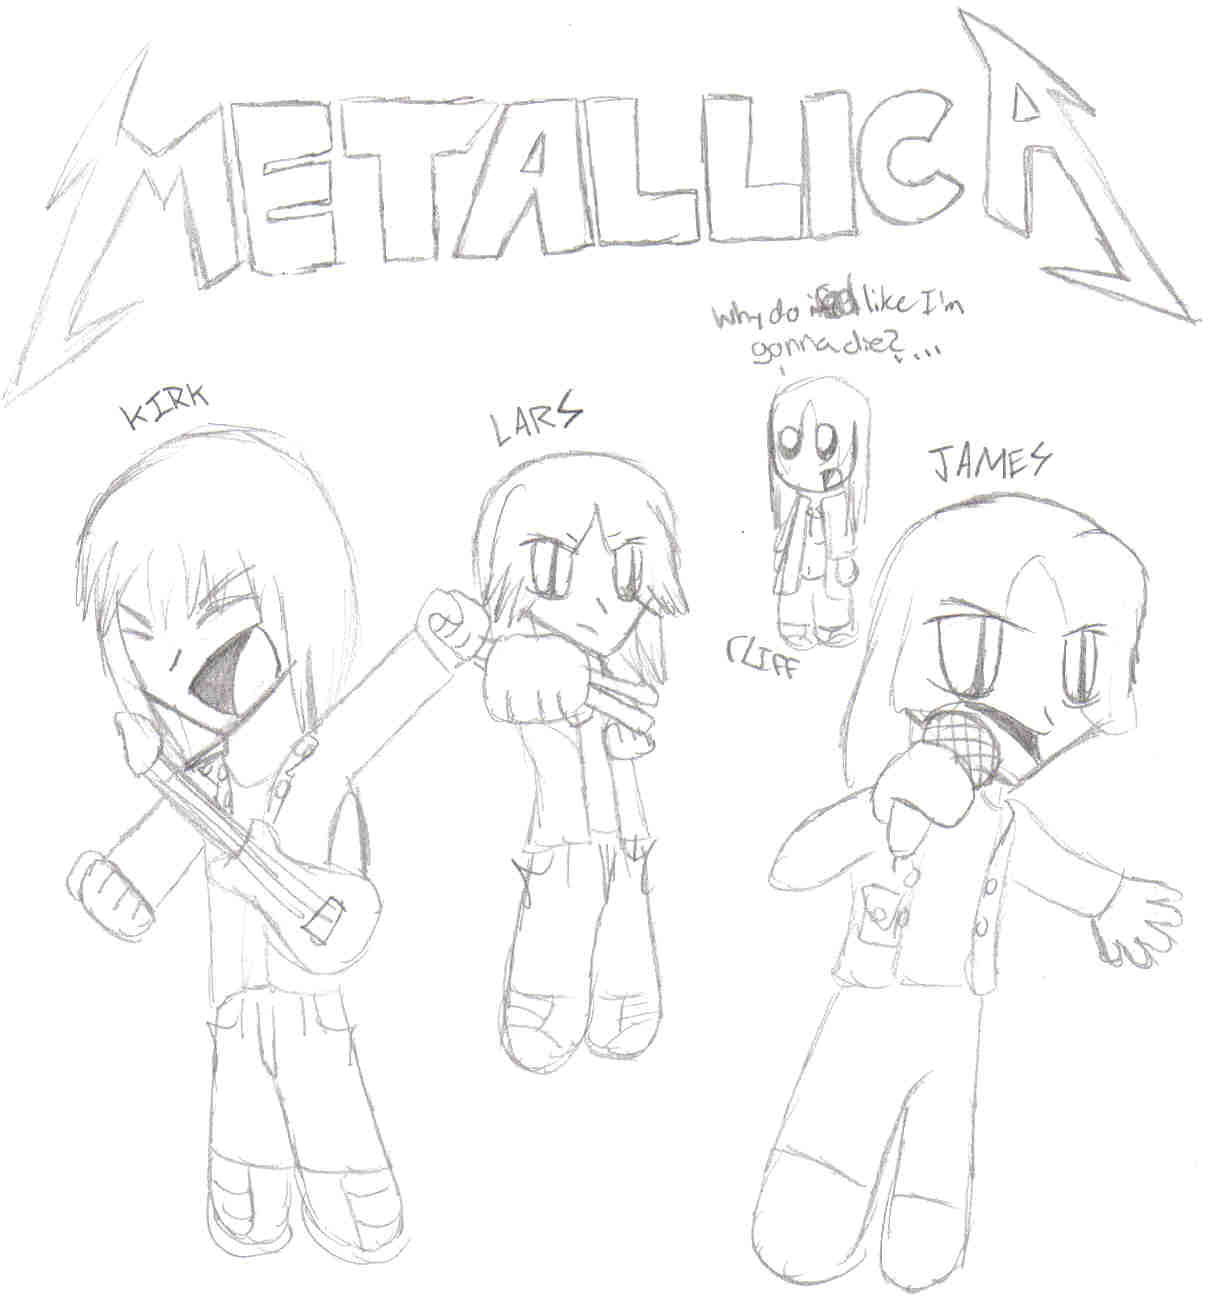 Chibi Metallica by orchid